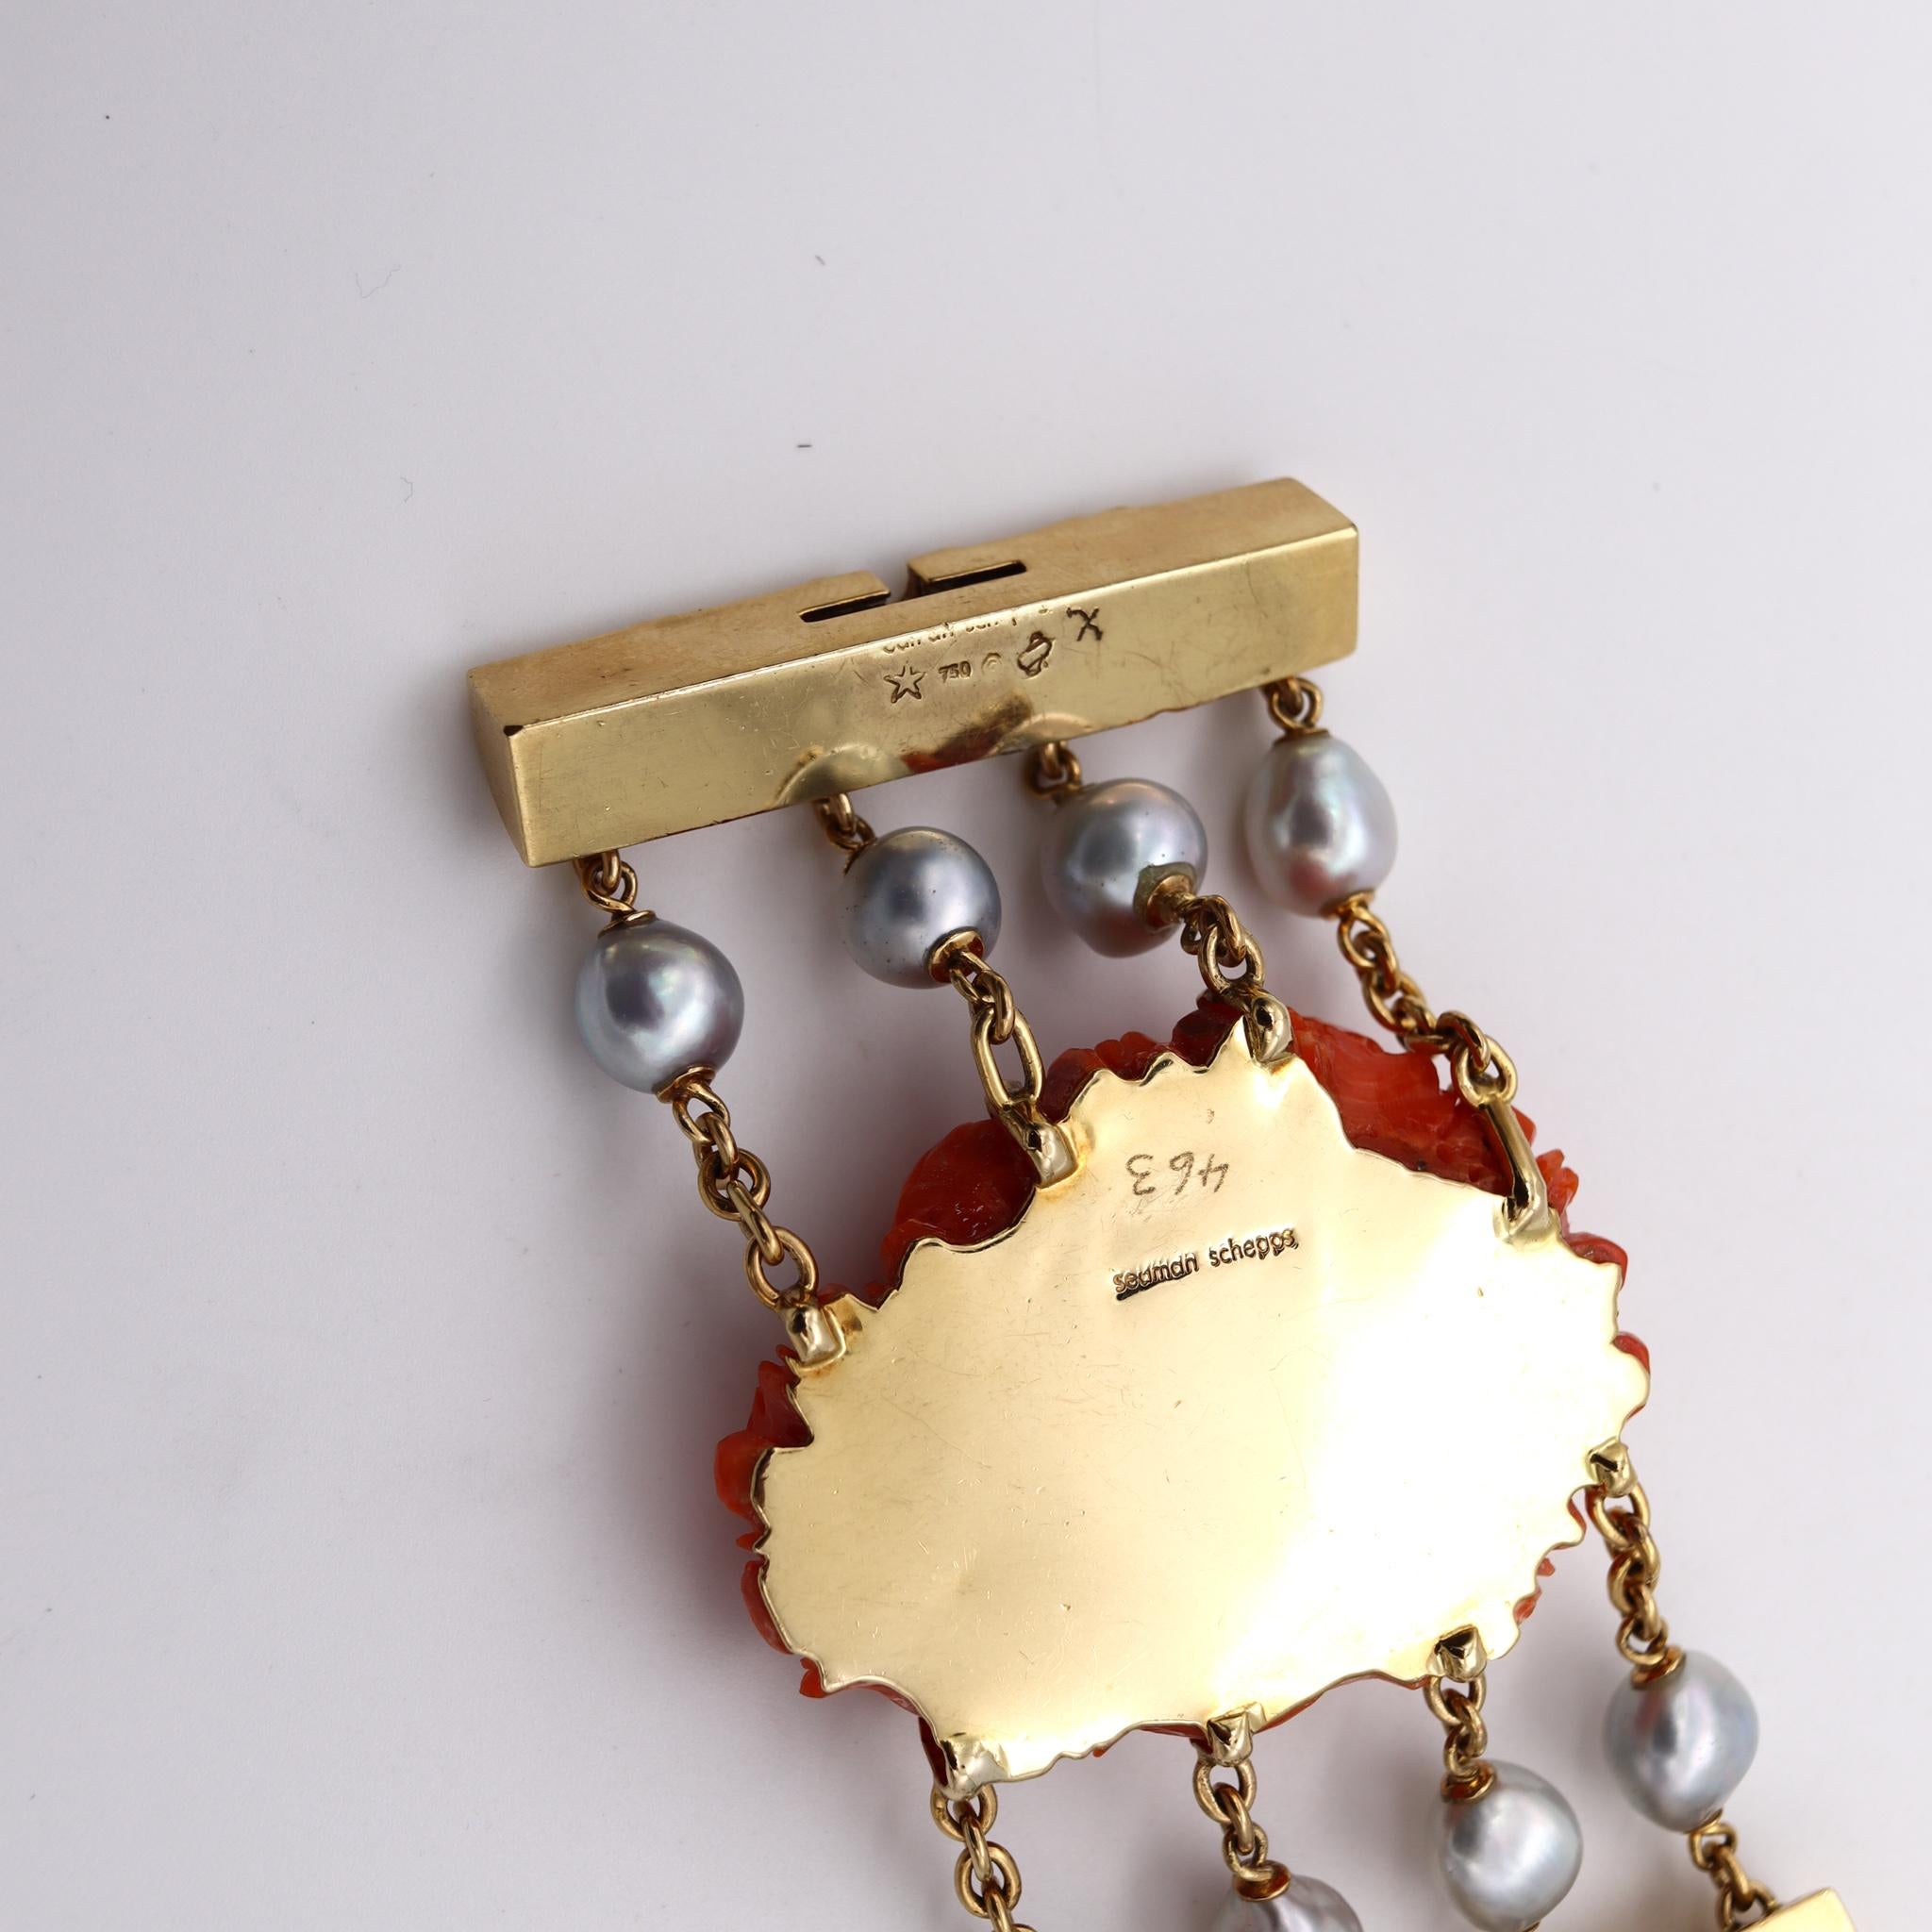 Seaman Schepps 1970 New York Rare Bracelet in 18Kt Gold with Red Coral and Pearl In Good Condition For Sale In Miami, FL